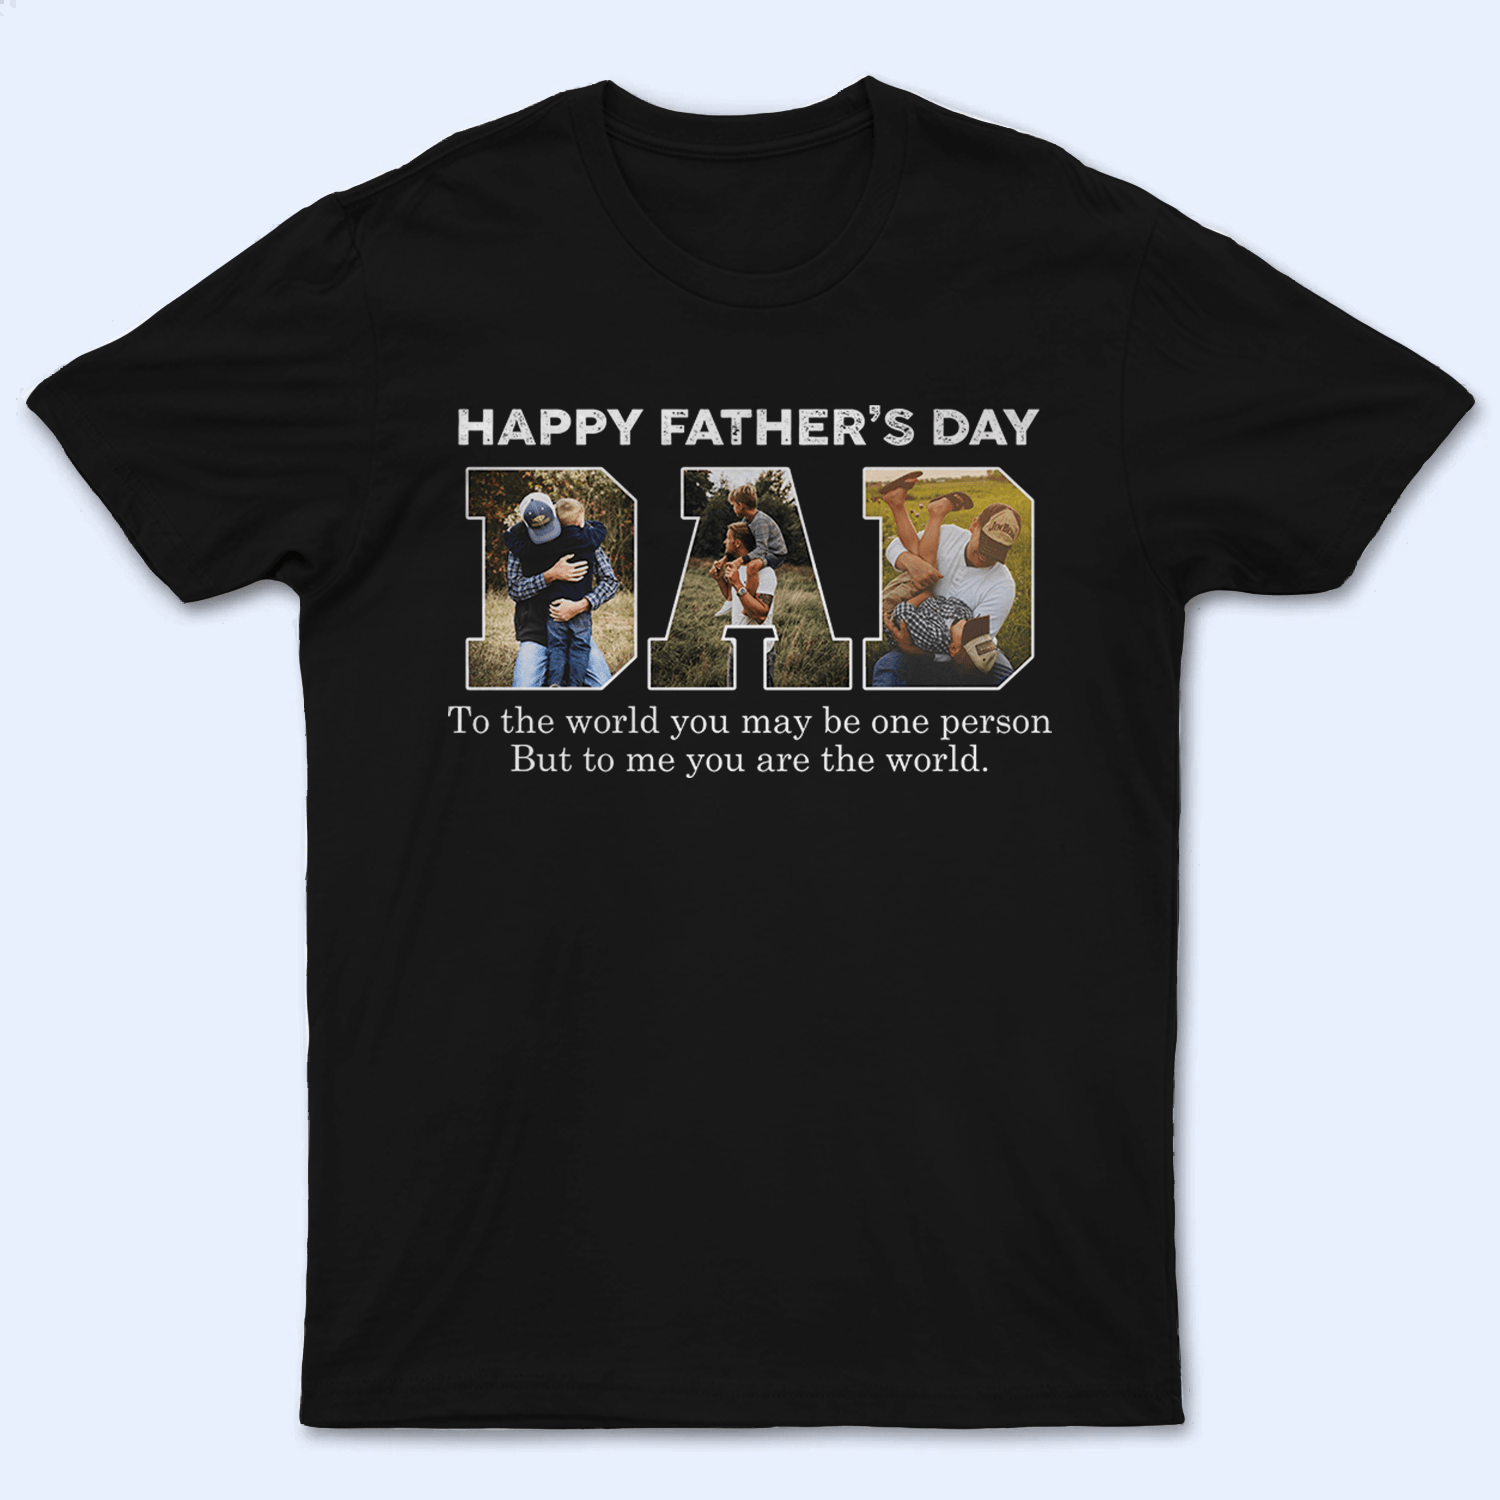 Custom Photo - Happy Fathers' Day. To Me You Are The World - Funny Fathers Day Personalized Custom T Shirt - Birthday, Loving, Funny Gift for Grandfather/Dad/Father, Husband, Grandparent